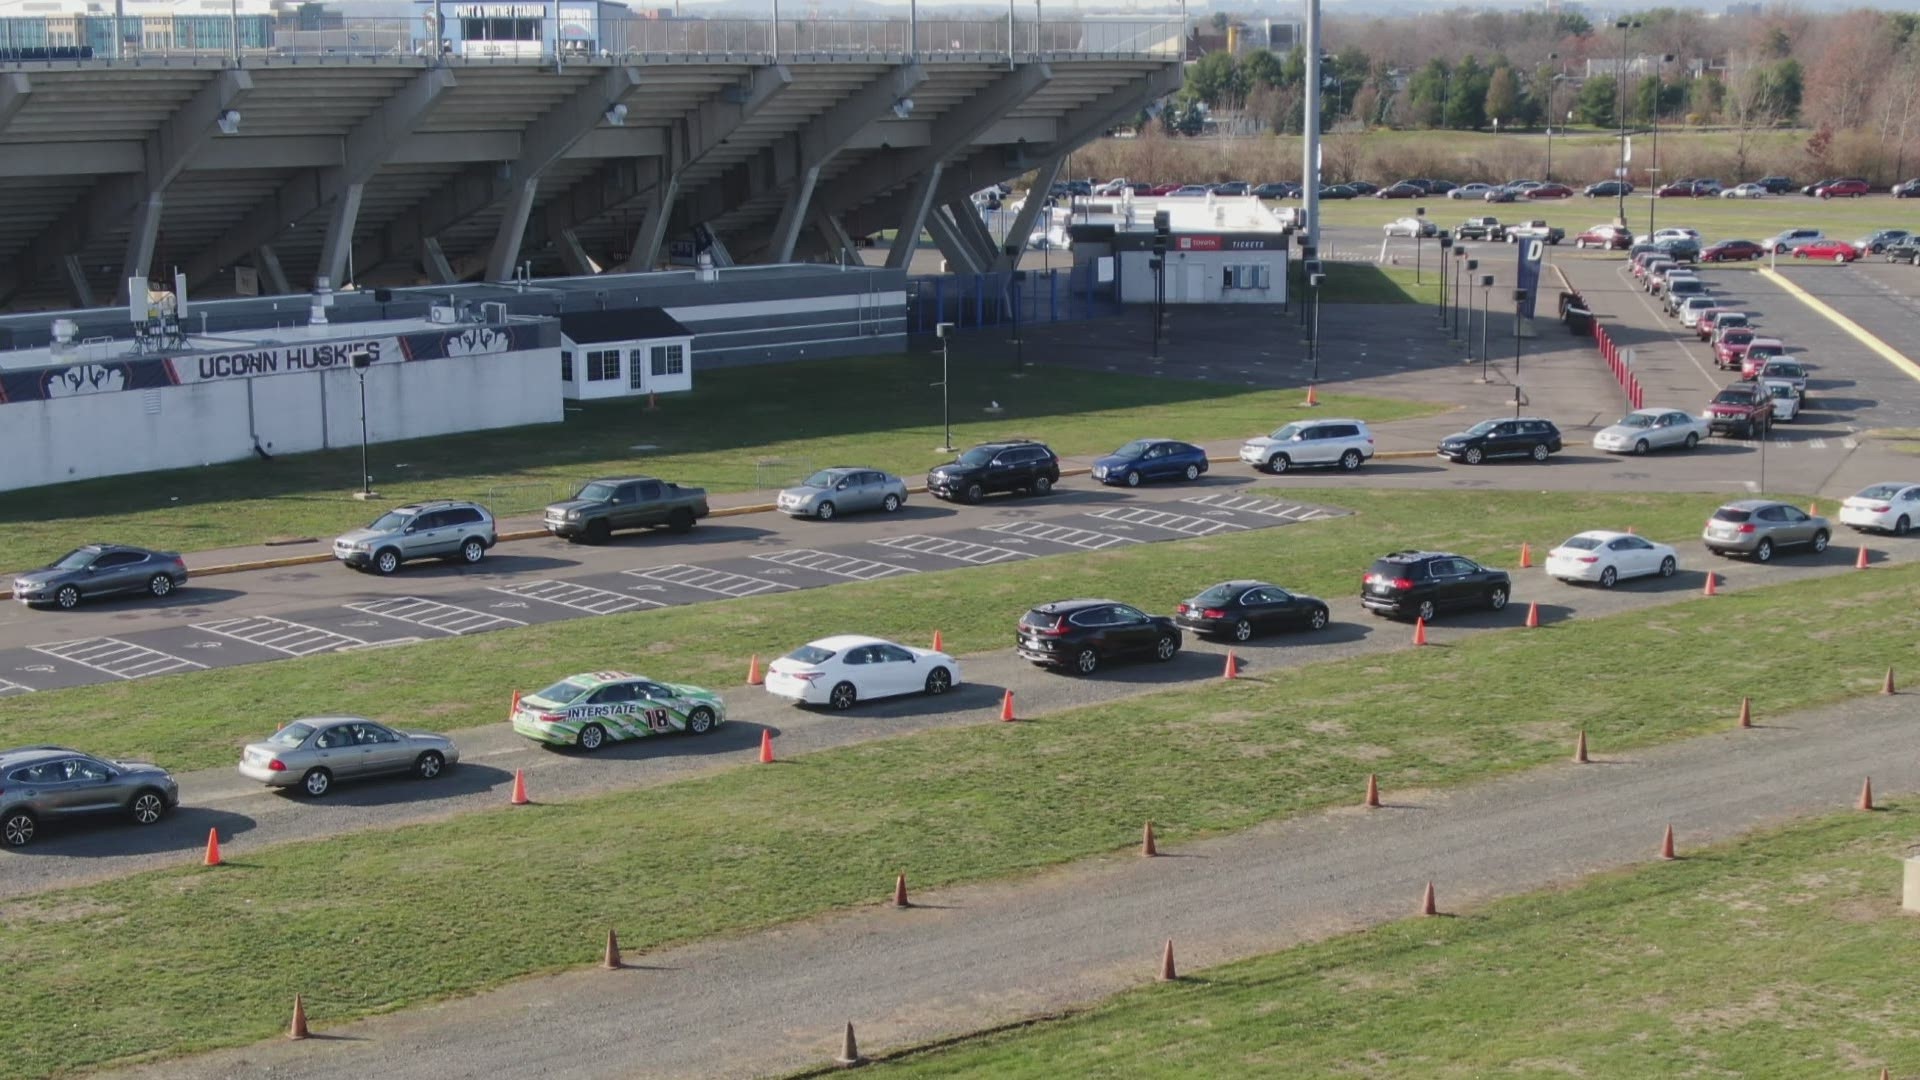 COVID-19 testing has increased in the state as cases rise. Take a look over Rentschler Field in East Hartford at their testing site